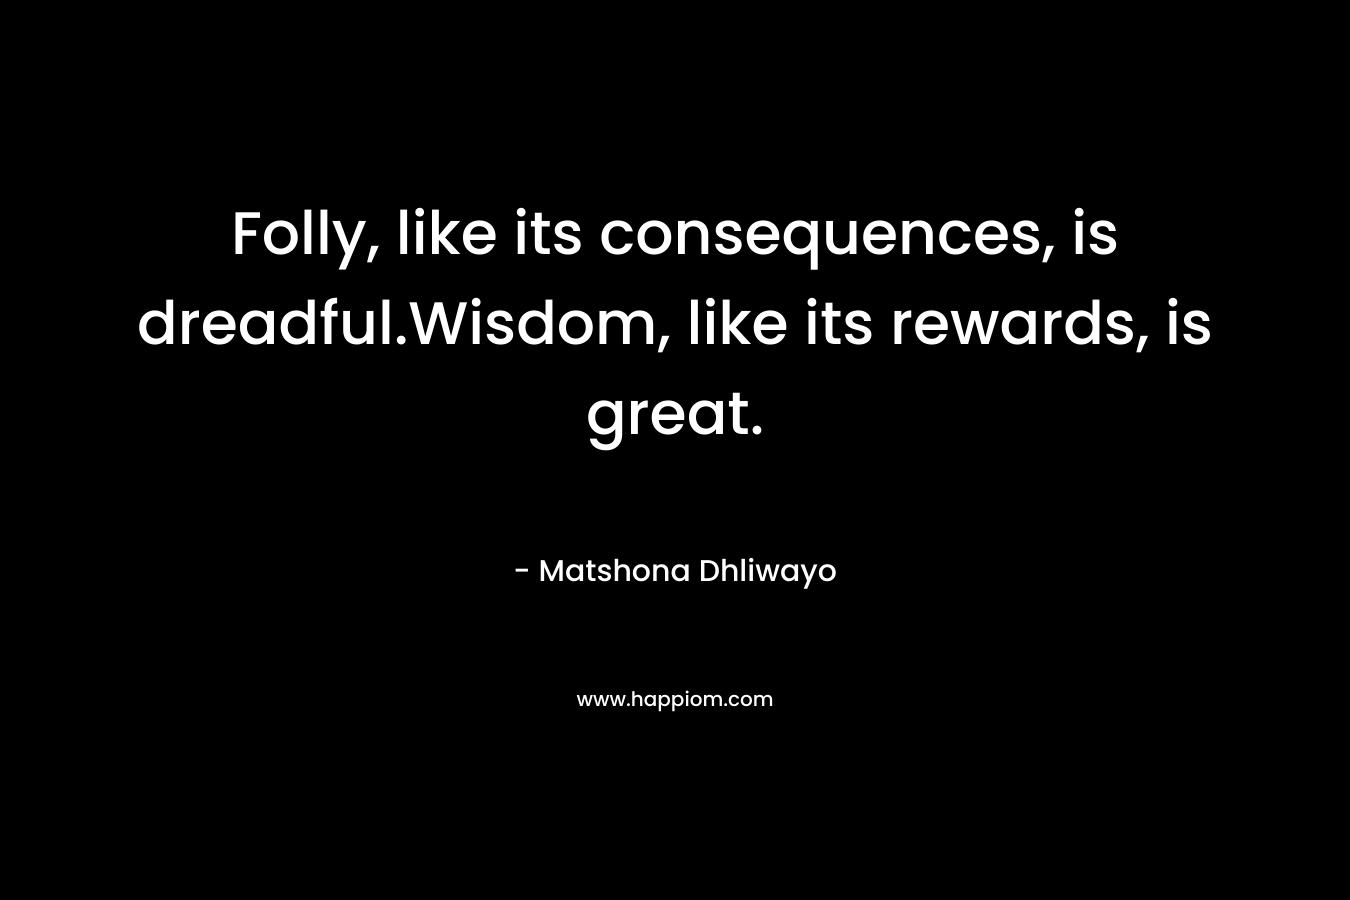 Folly, like its consequences, is dreadful.Wisdom, like its rewards, is great.